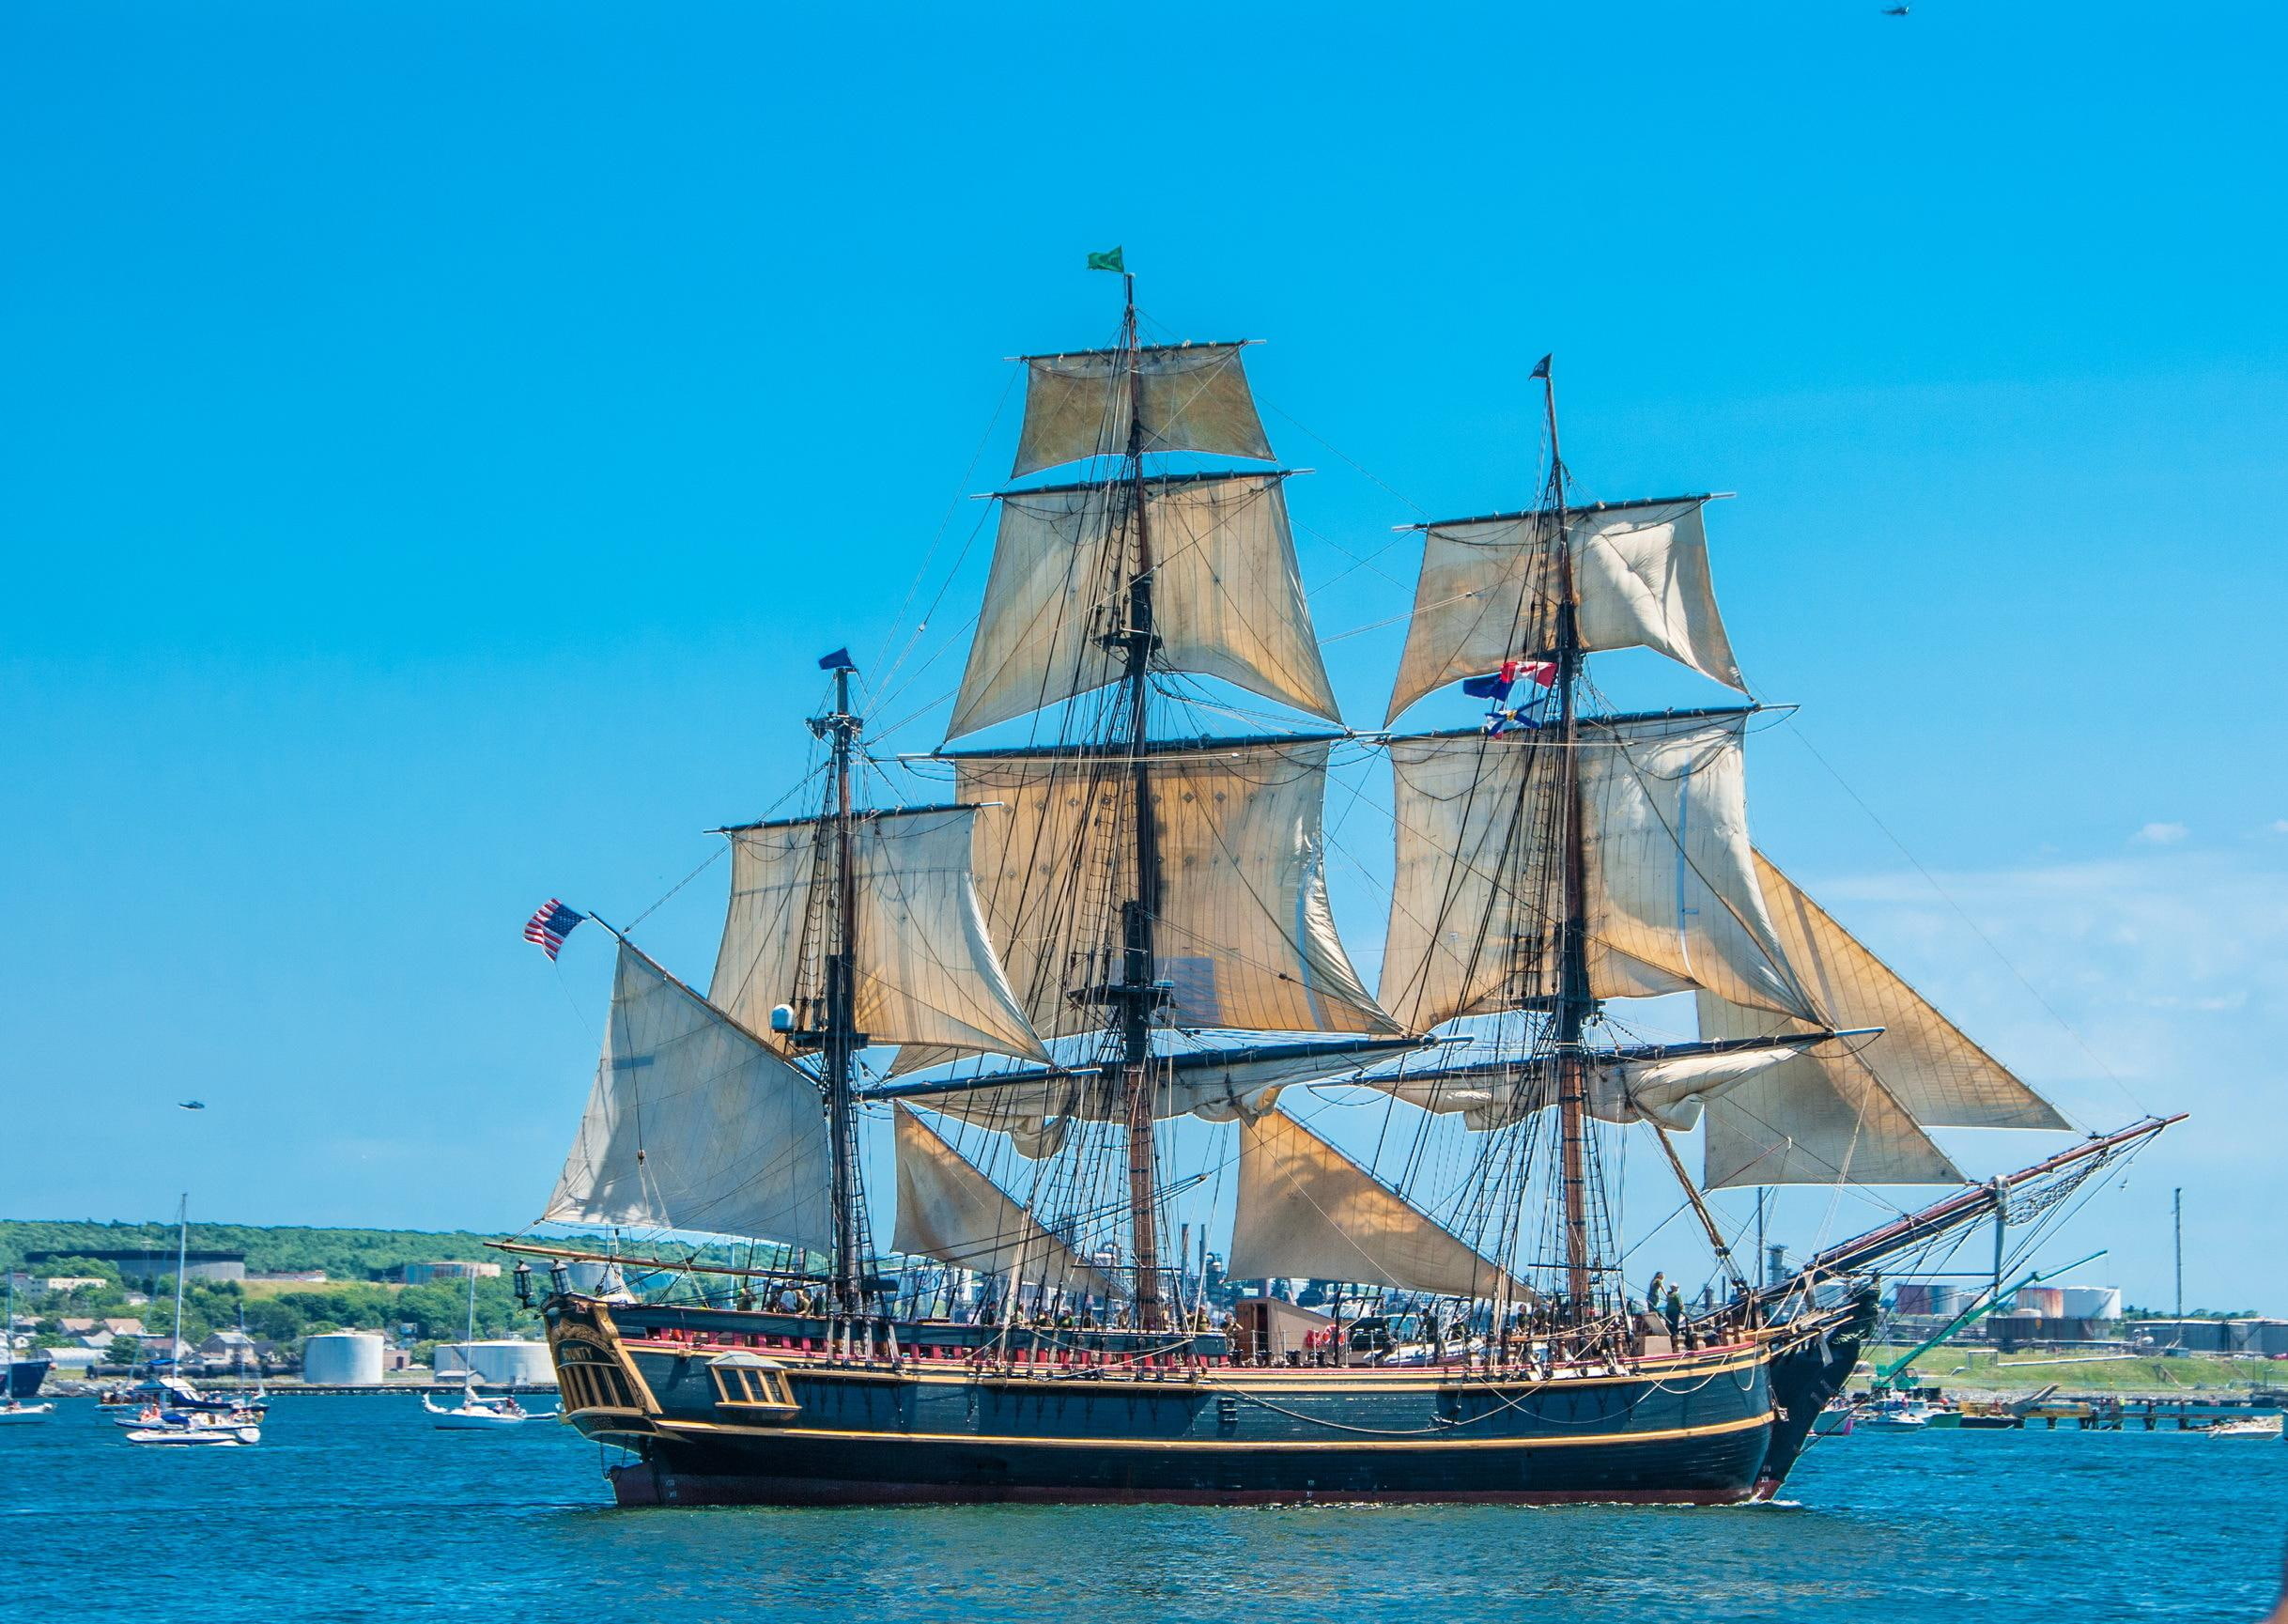 canada, ship, sail, halifax, regional, municipality, blue and brown wooden galleon